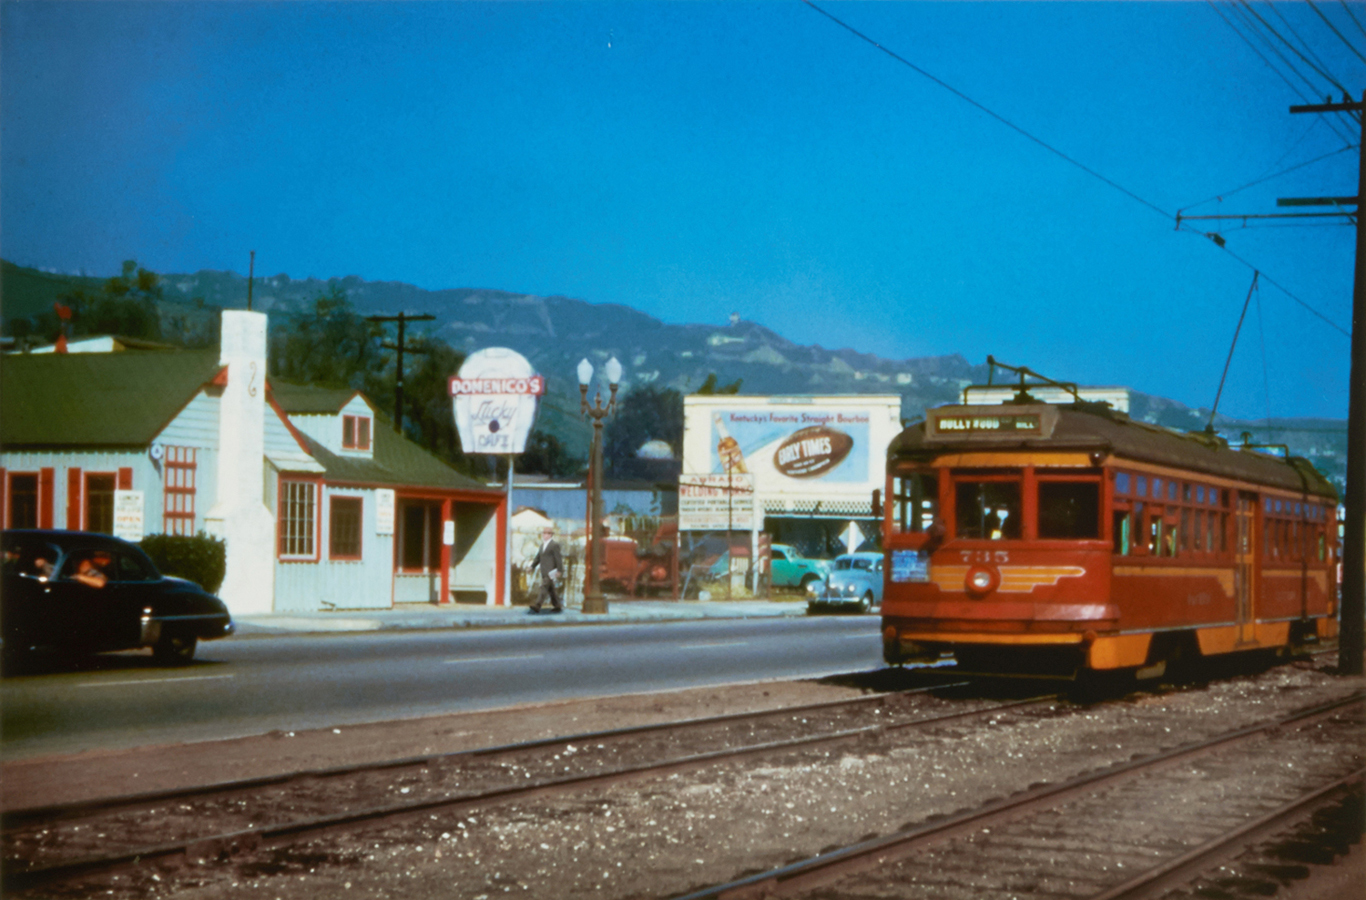 The Pacific Electric Red Car Trolley running outside the restaurant site on Santa Monica Blvd